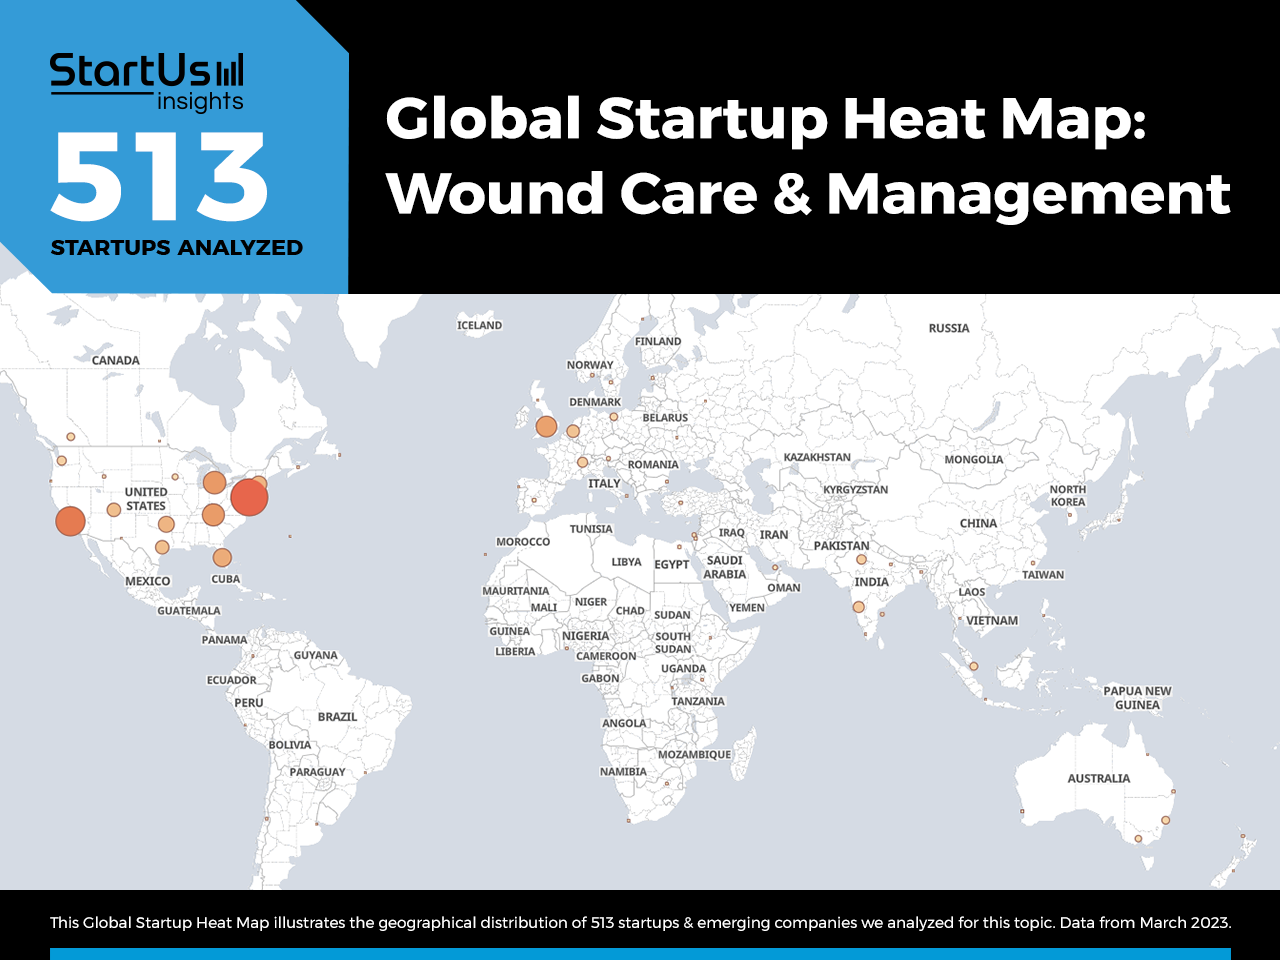 Wound-Care-trends-Heat-Map-StartUs-Insights-noresize